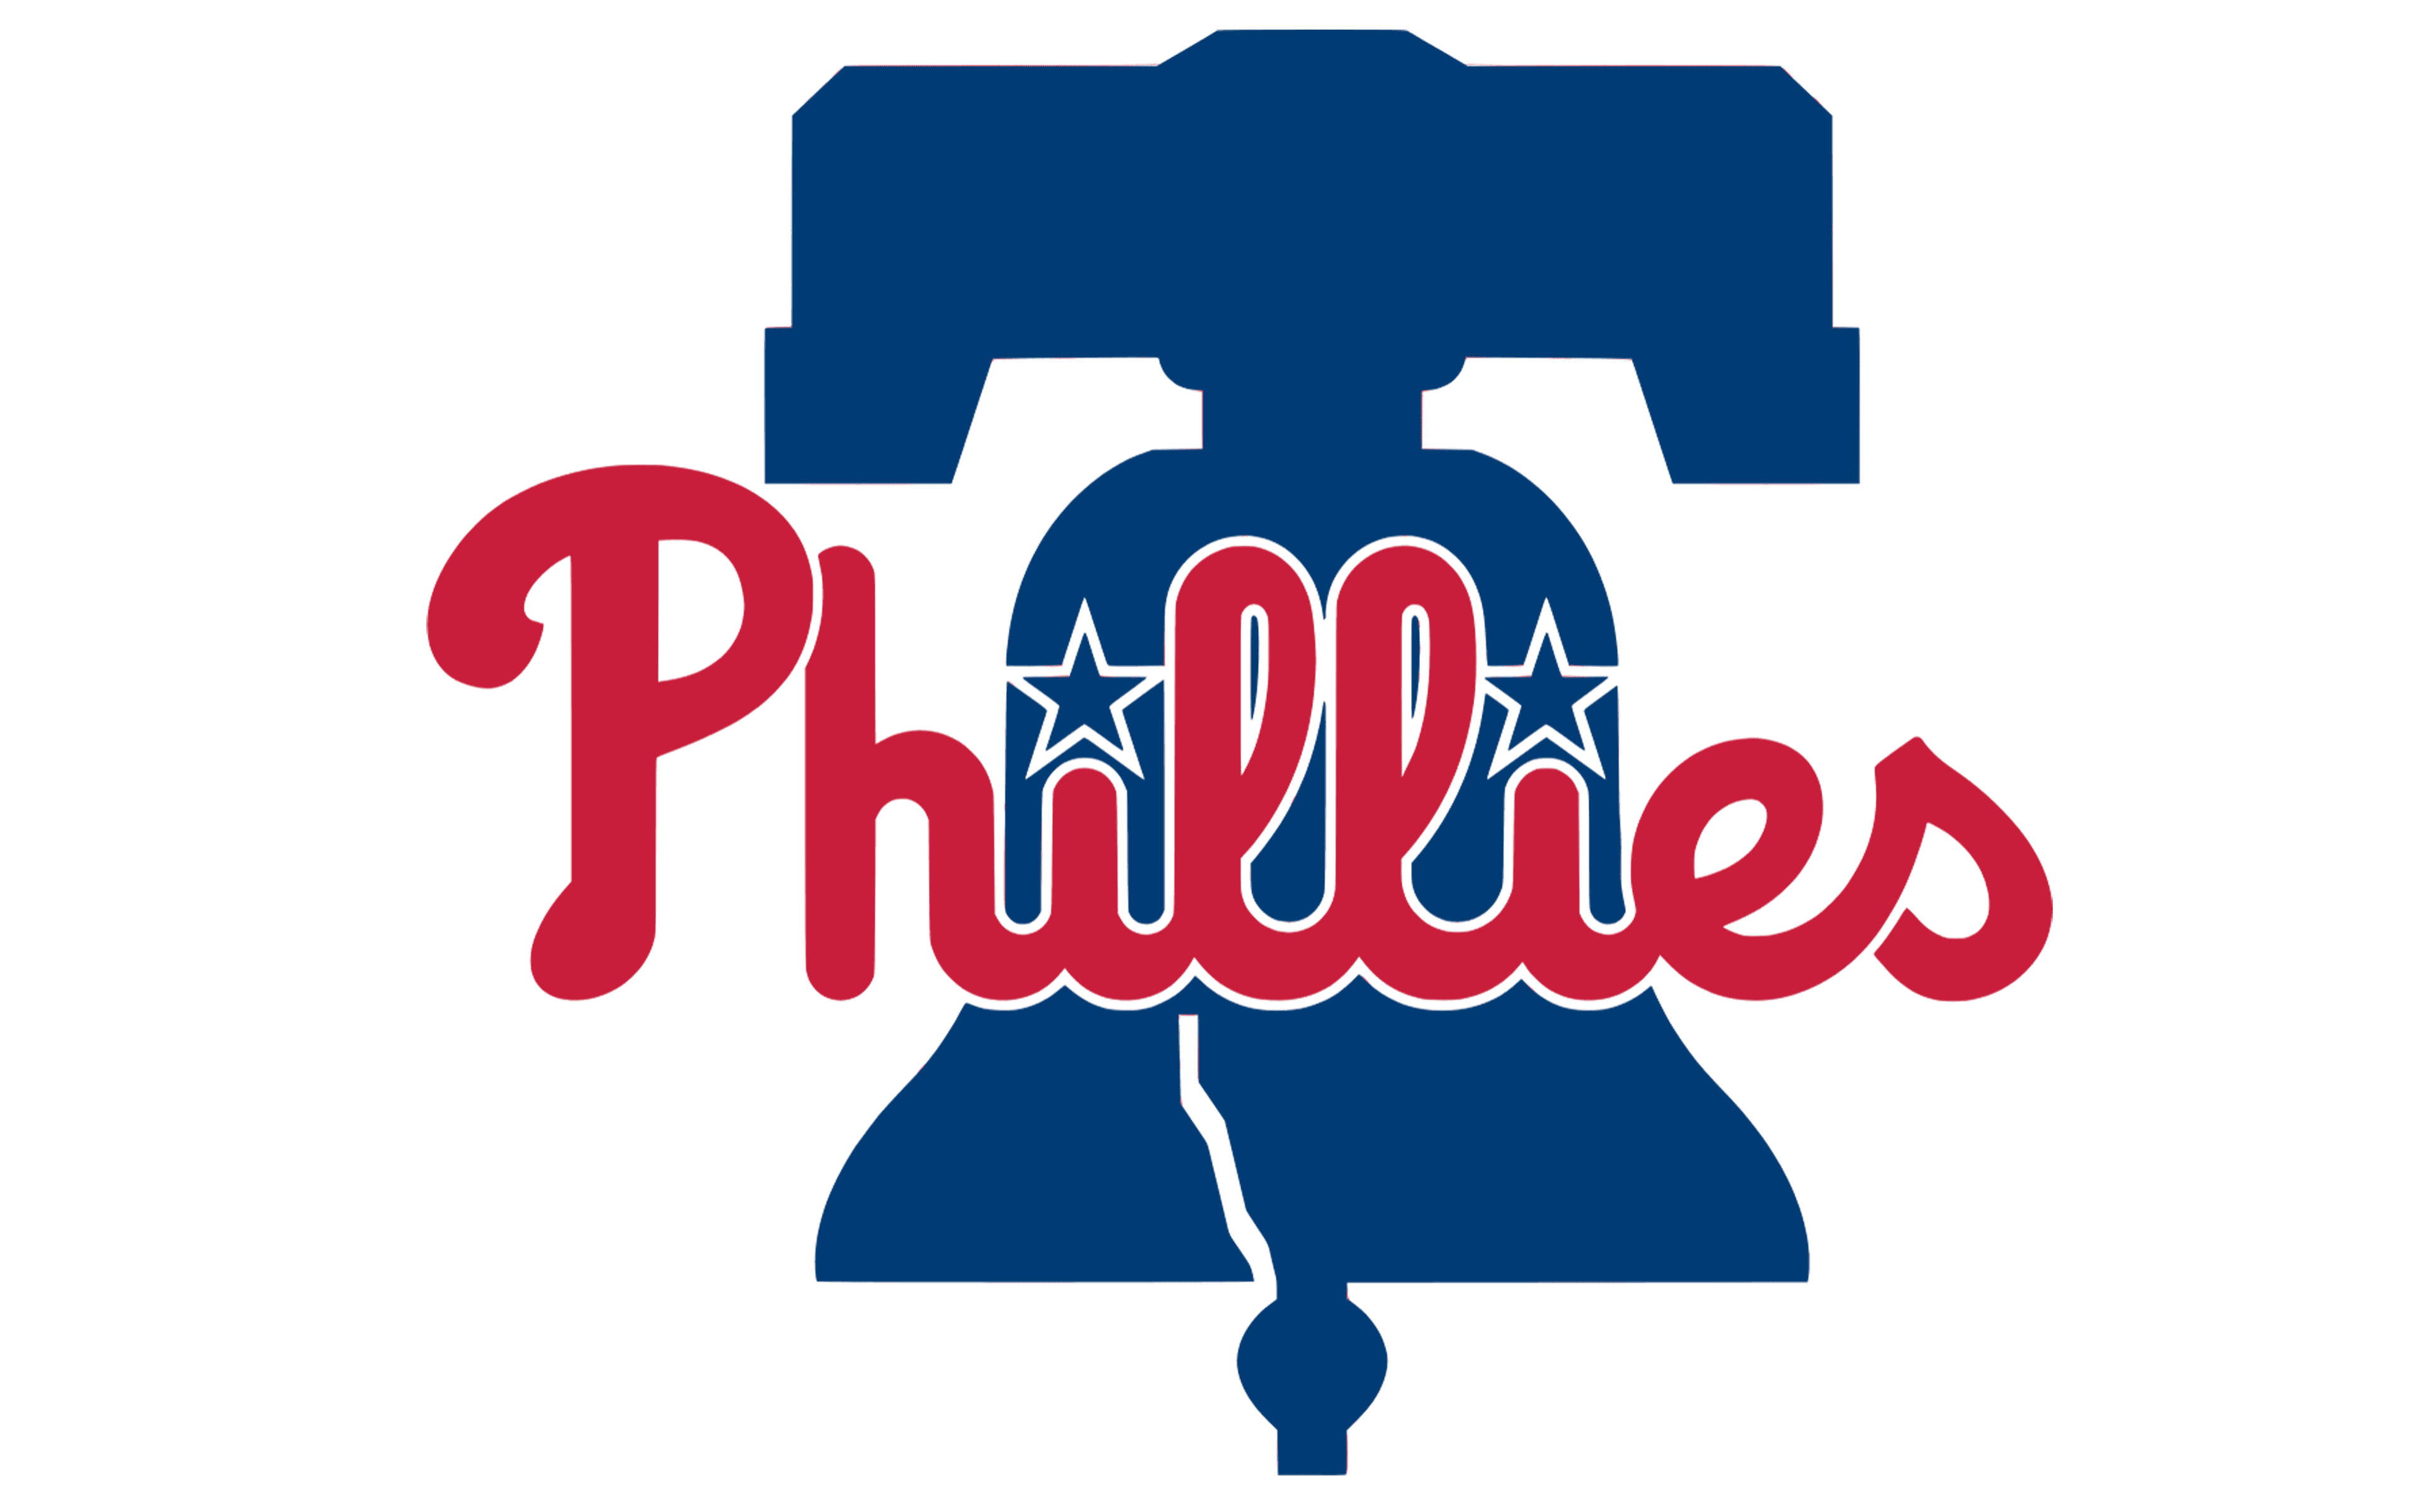 CONCEPT: If the phillies combined their 80s color scheme with